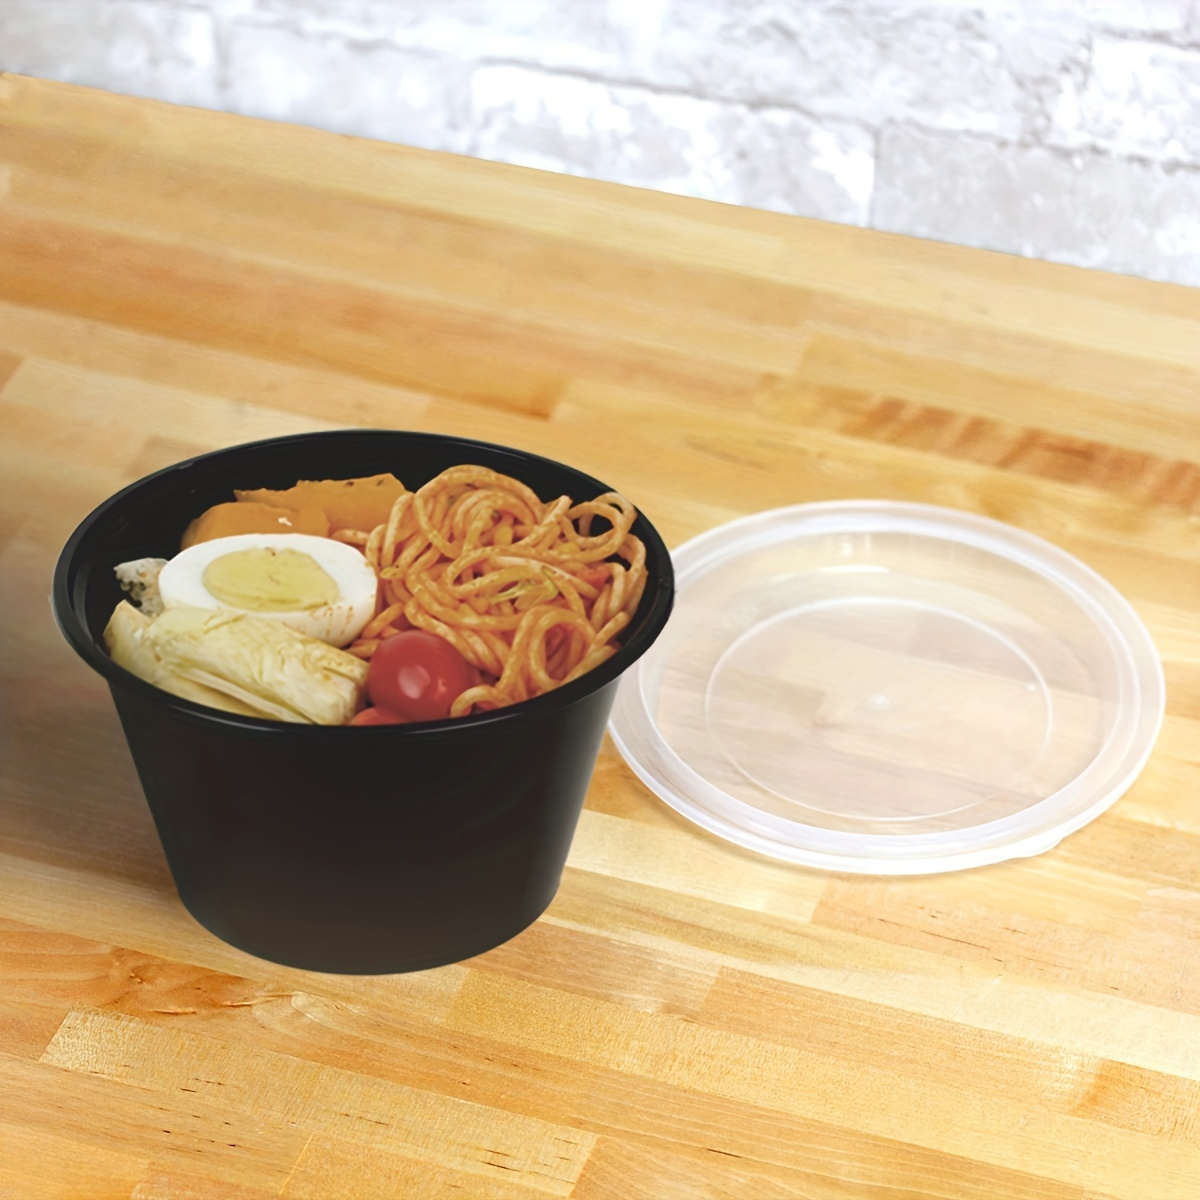 Hot Food Containers Launch for Food Takeout and Delivery, 2019-10-08